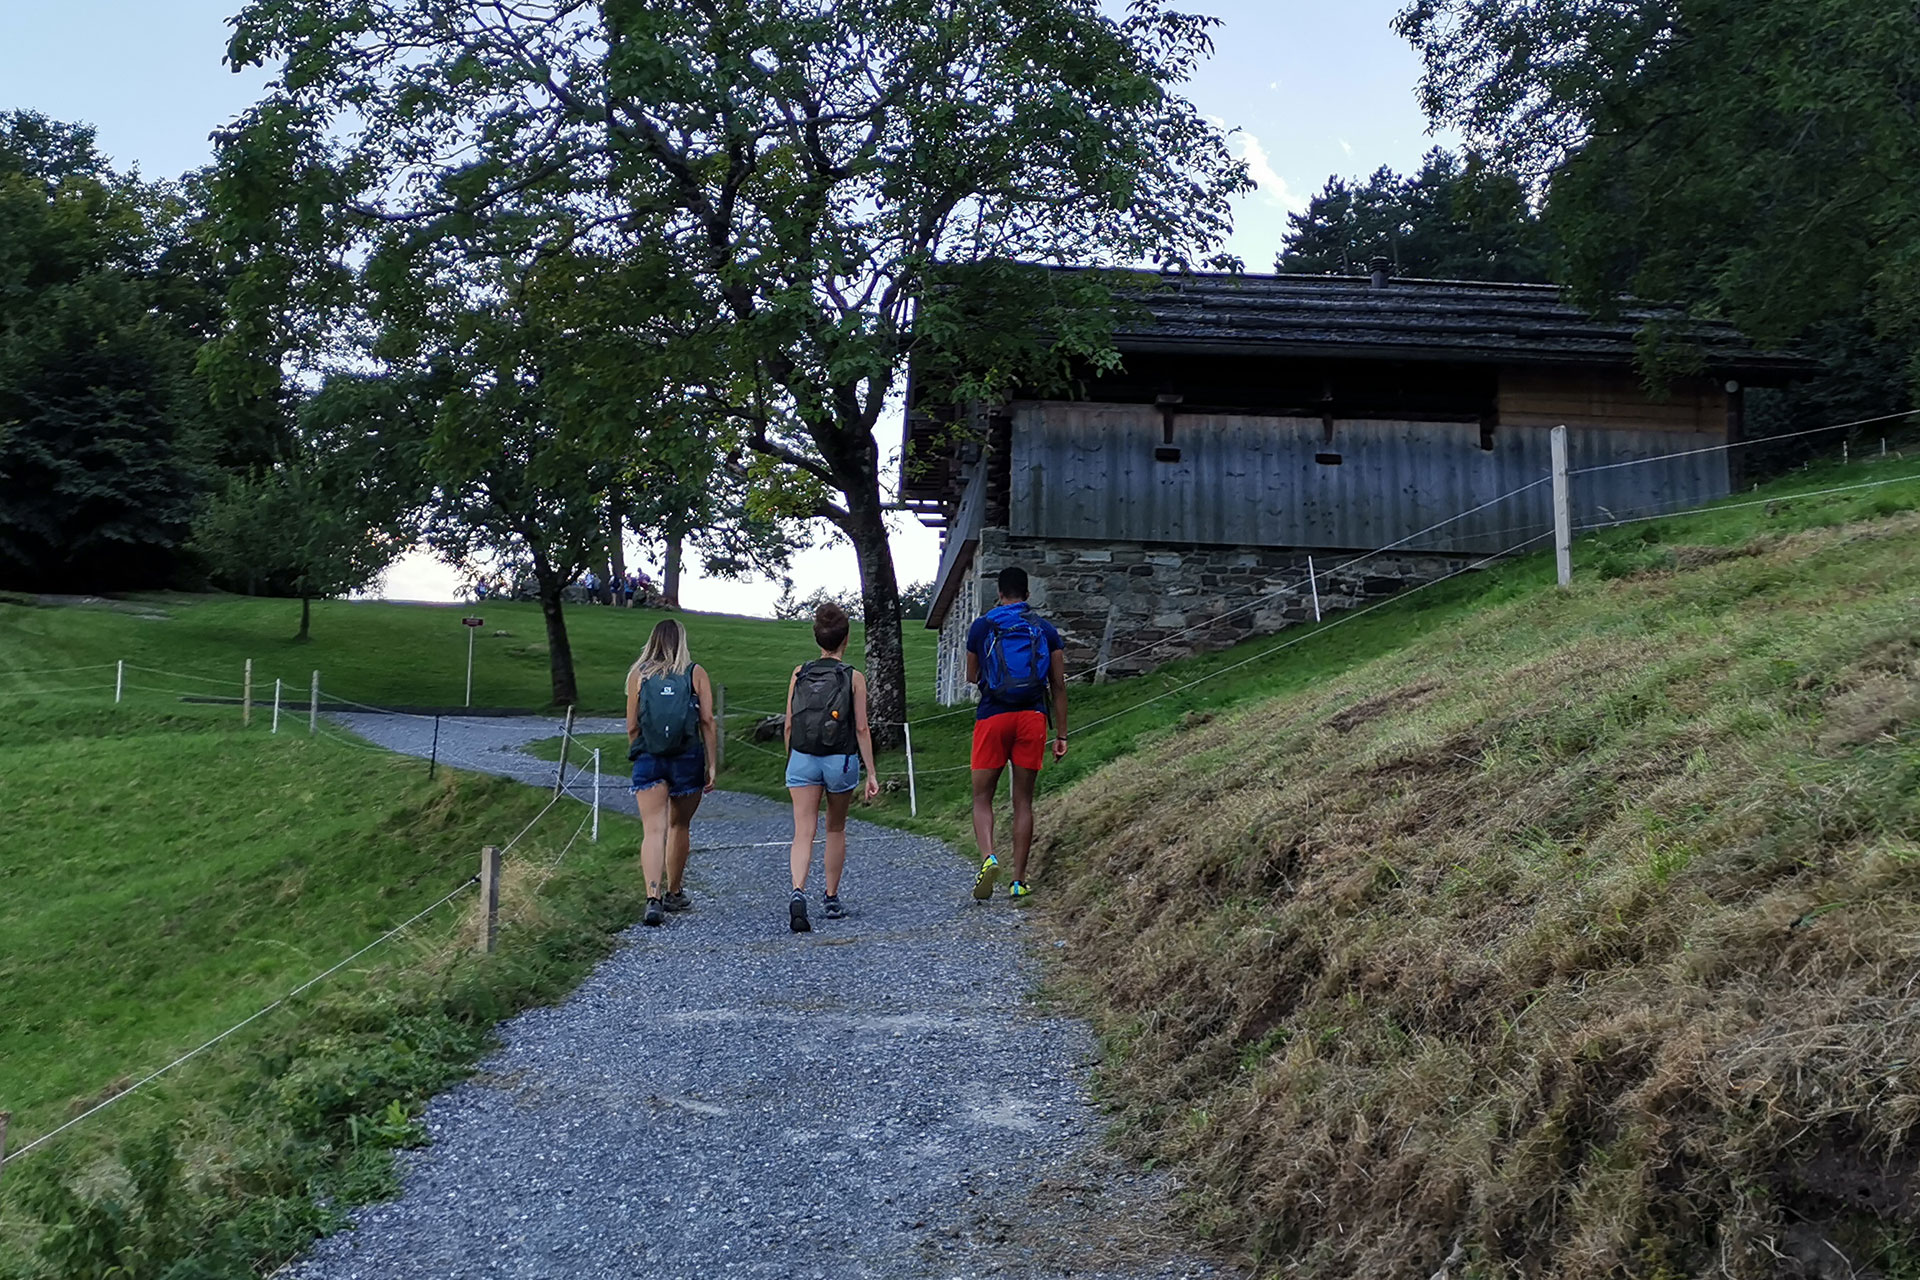 Guided Hike with an Environmental & Swiss Expert (from Bern)